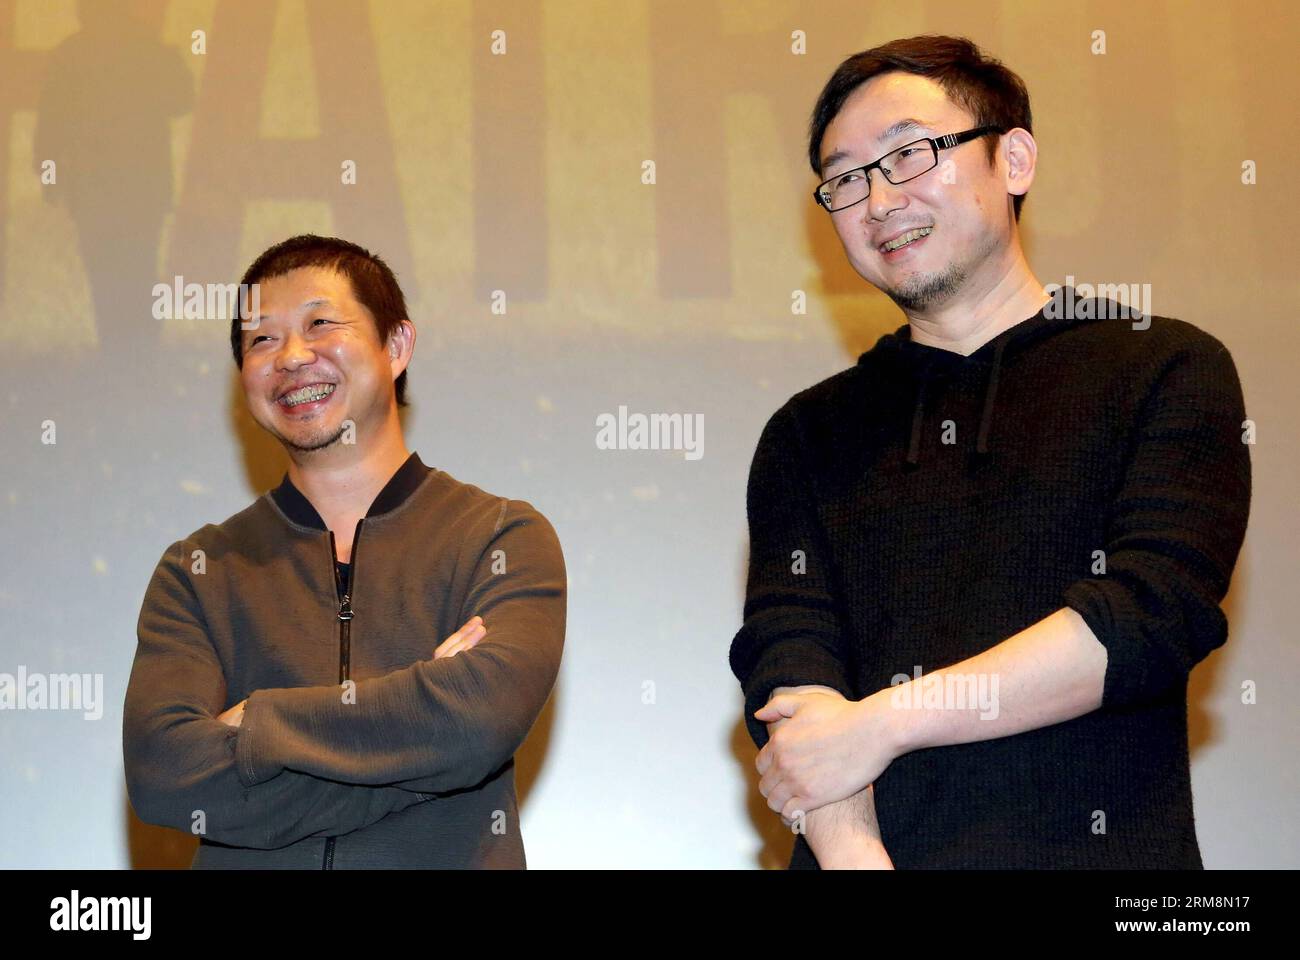 Photographer Cao Yu(L) and director Lu Chuan(R) attend the 10th anniversary activity of film Mountain Patrol in Beijing, capital of China, April 20, 2014. Film Mountain Patrol , directed by Lu Chuan, was screened in China on Oct. 1, 2004. (Xinhua) (zwy) CHINA-BEIJING-FILM MOUNTAIN PATROL-TENTH ANNIVERSARY(CN) PUBLICATIONxNOTxINxCHN   Photo Cao Yu l and Director Lu Chuan r attend The 10th Anniversary Activity of Film Mountain Patrol in Beijing Capital of China April 20 2014 Film Mountain Patrol Directed by Lu Chuan what screened in China ON OCT 1 2004 XINHUA  China Beijing Film Mountain Patrol Stock Photo